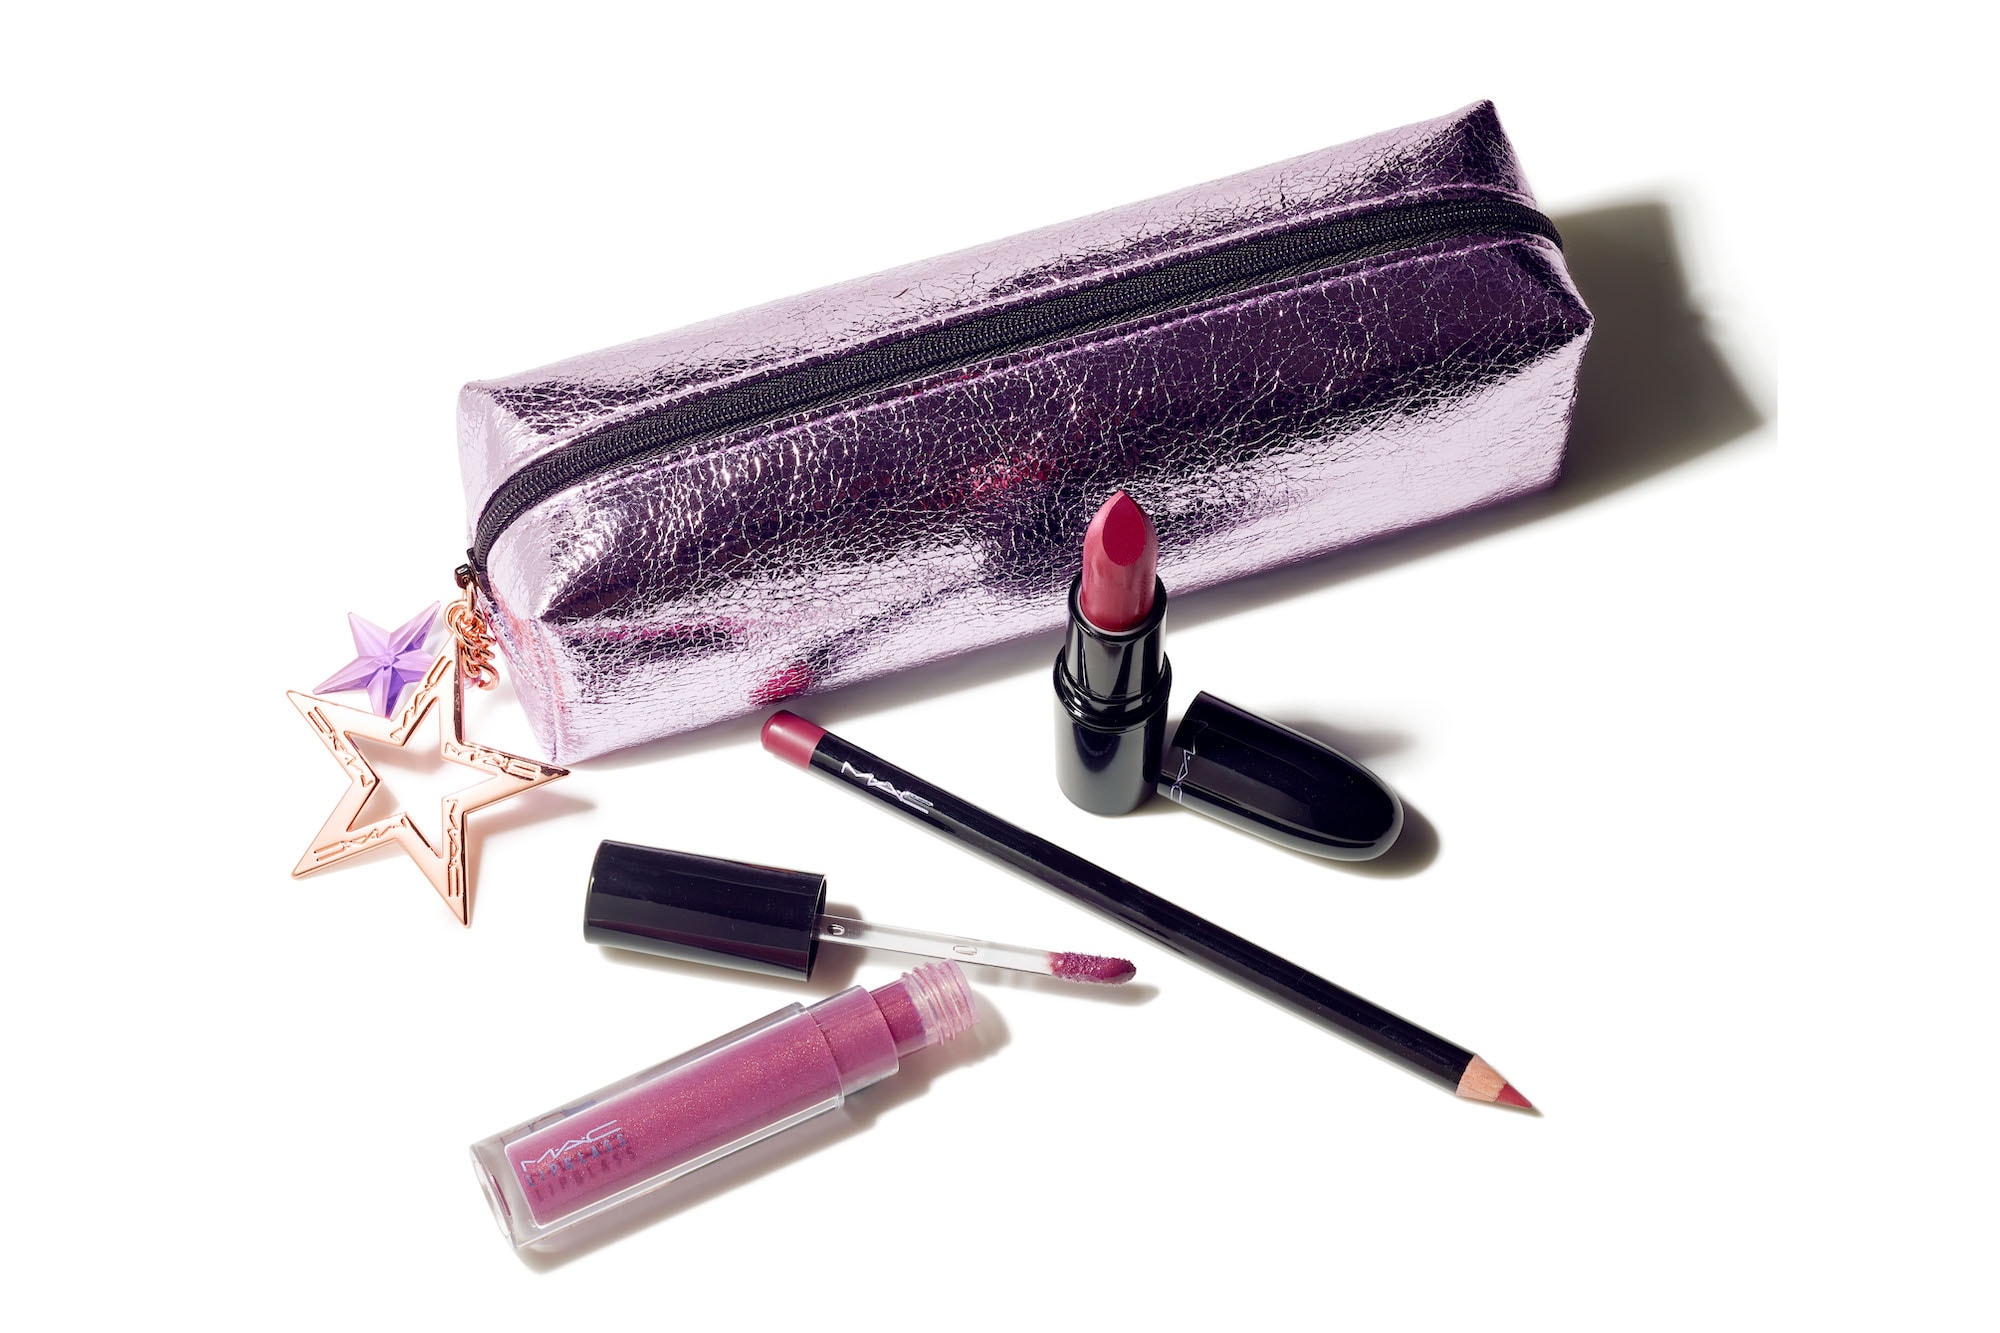 MAC Cosmetics "Starring You" Makeup Collection Lipstick Eyeshadow Glitter Holiday Glam Beauty Products 